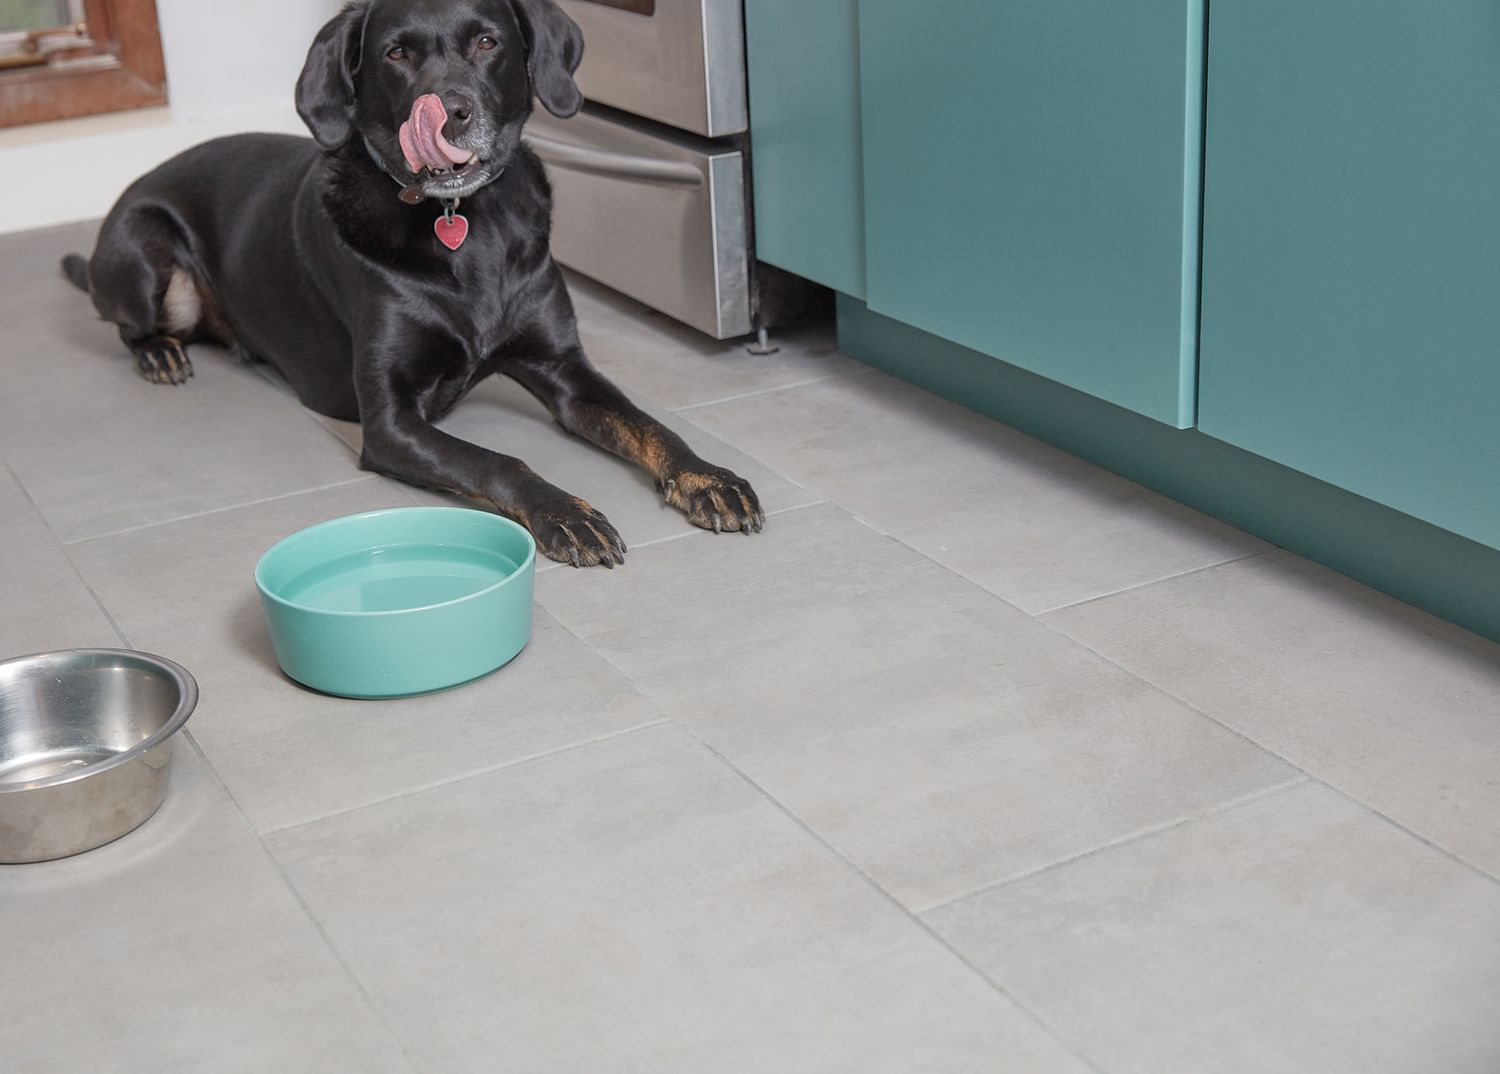 Black dog licking face on pet proof kitchen floor next to teal bowl with water